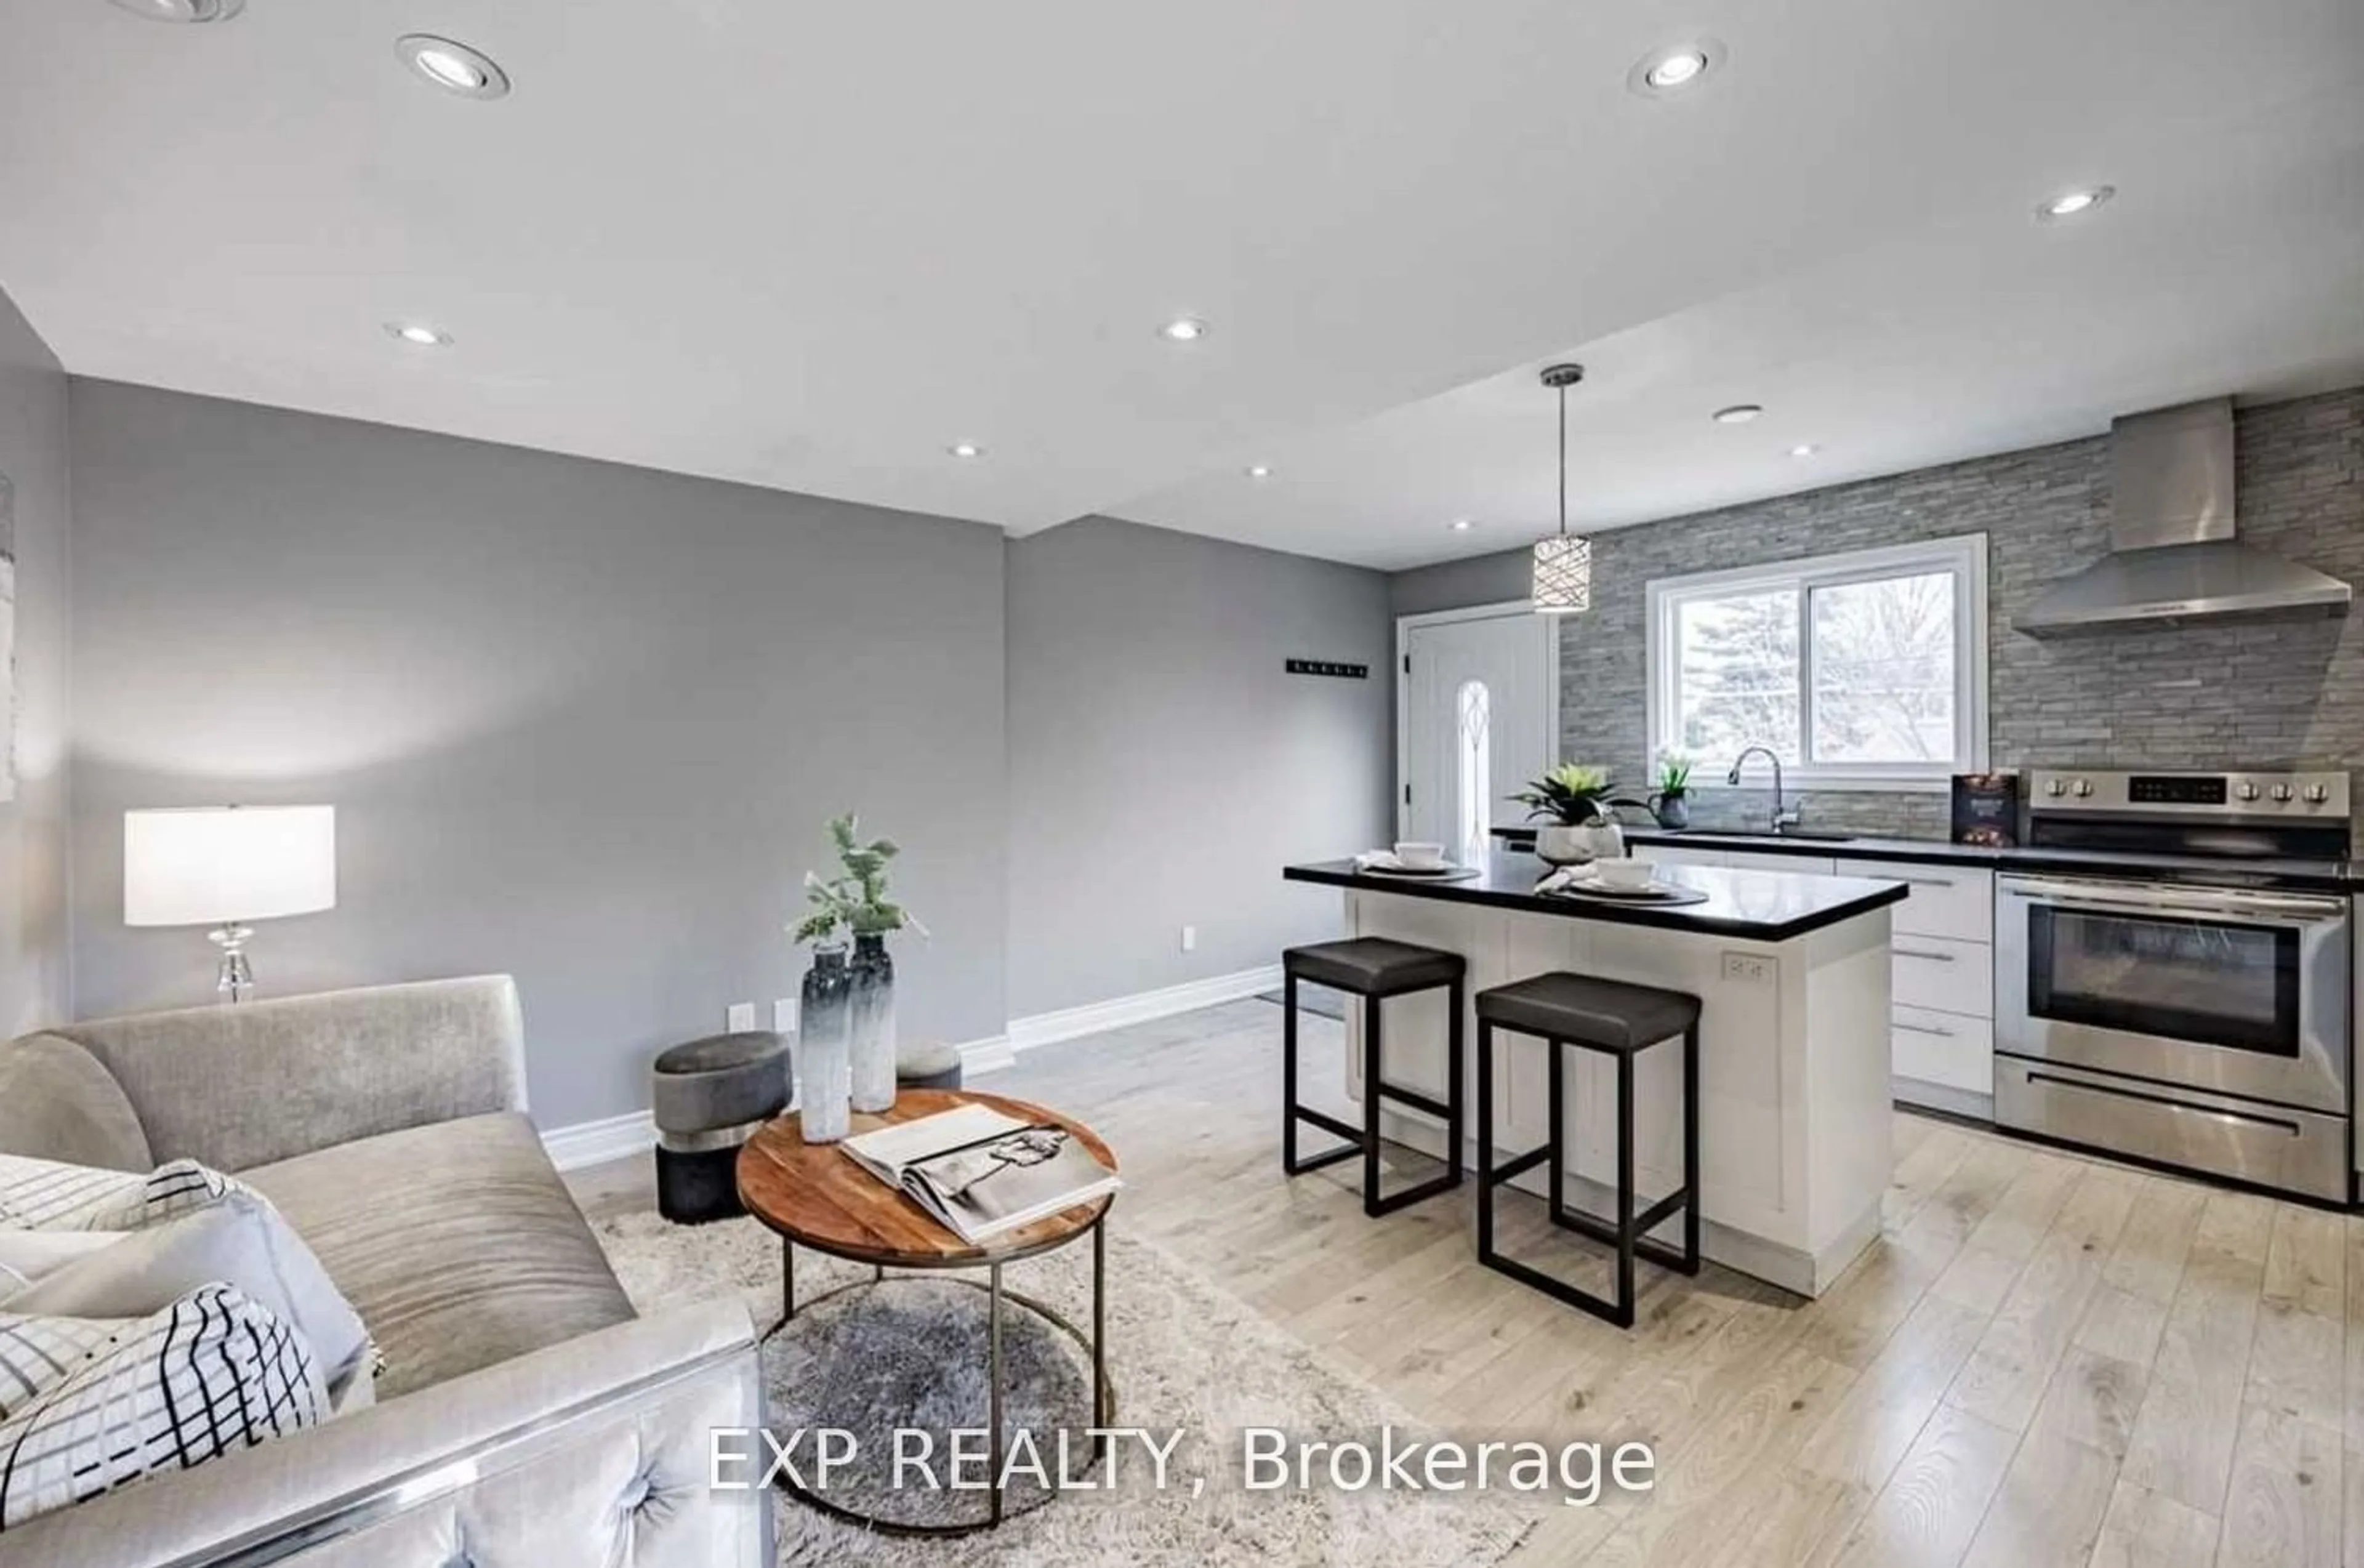 Contemporary kitchen for 29 Bernice Cres, Toronto Ontario M6N 1W7